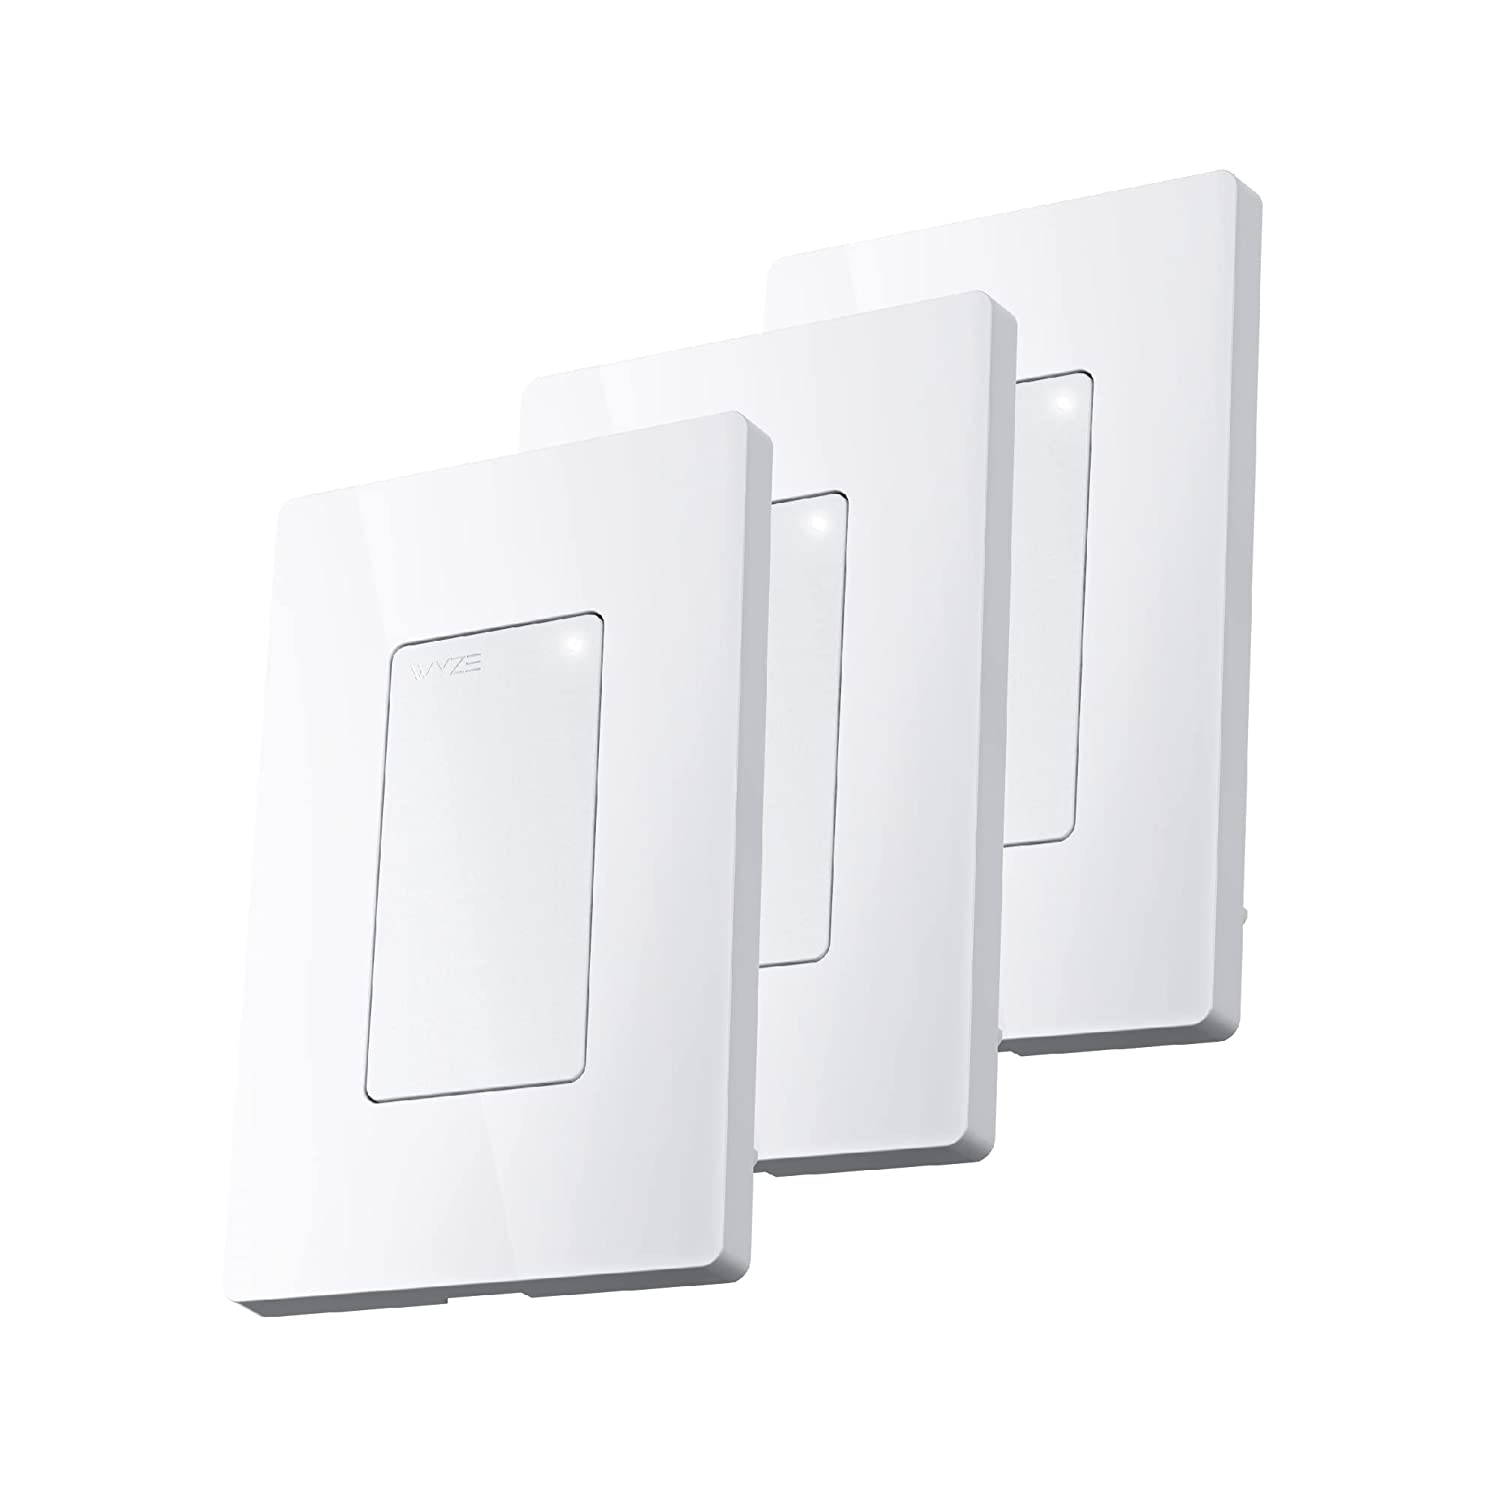 Three Wyze Switch units against a white background.